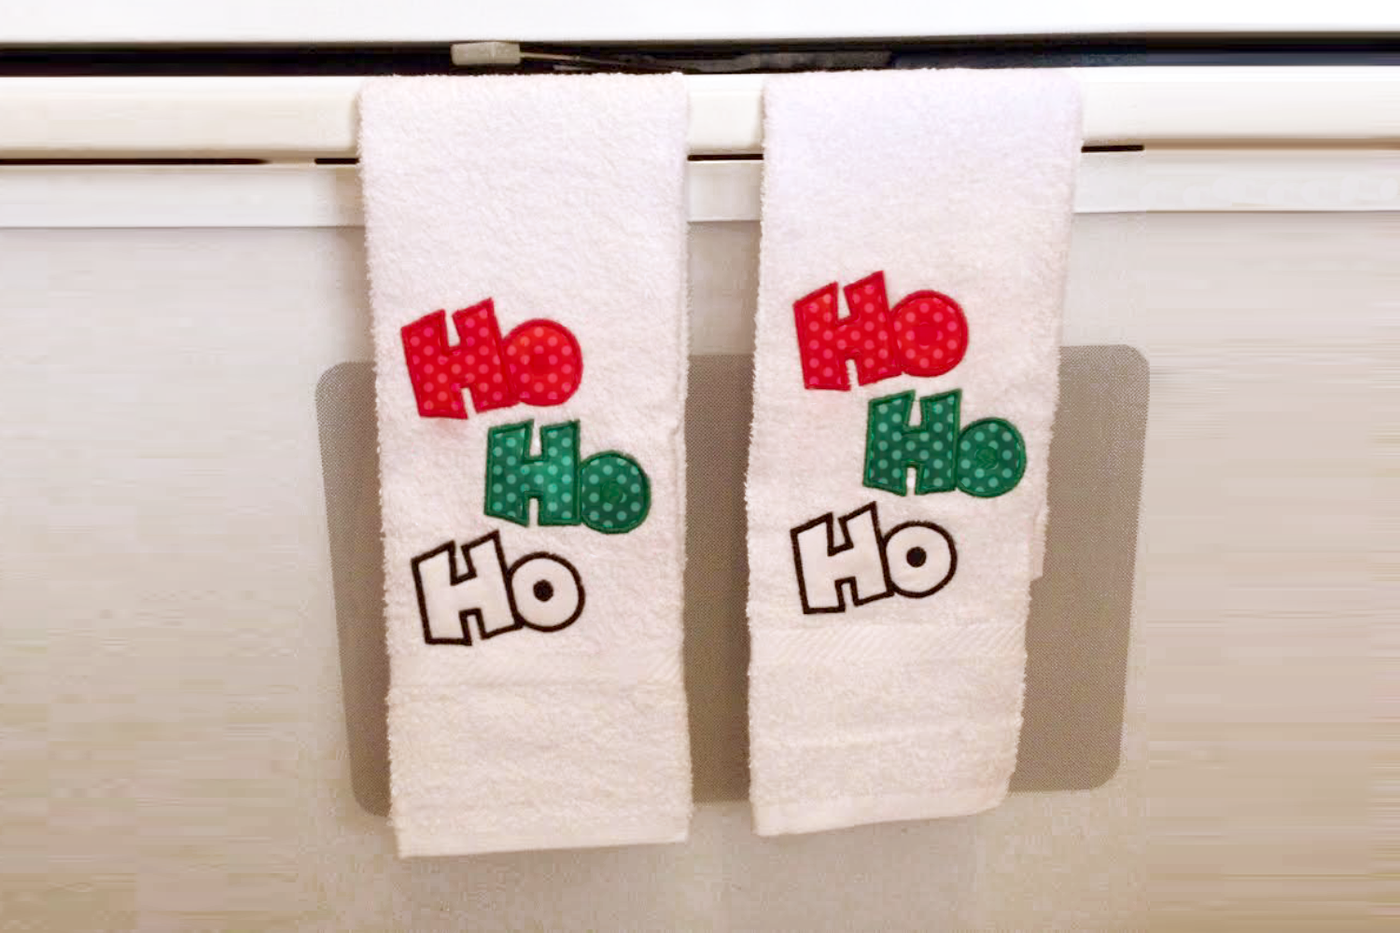 Applique of "Ho Ho Ho" with each Ho stacked vertically and staggered.